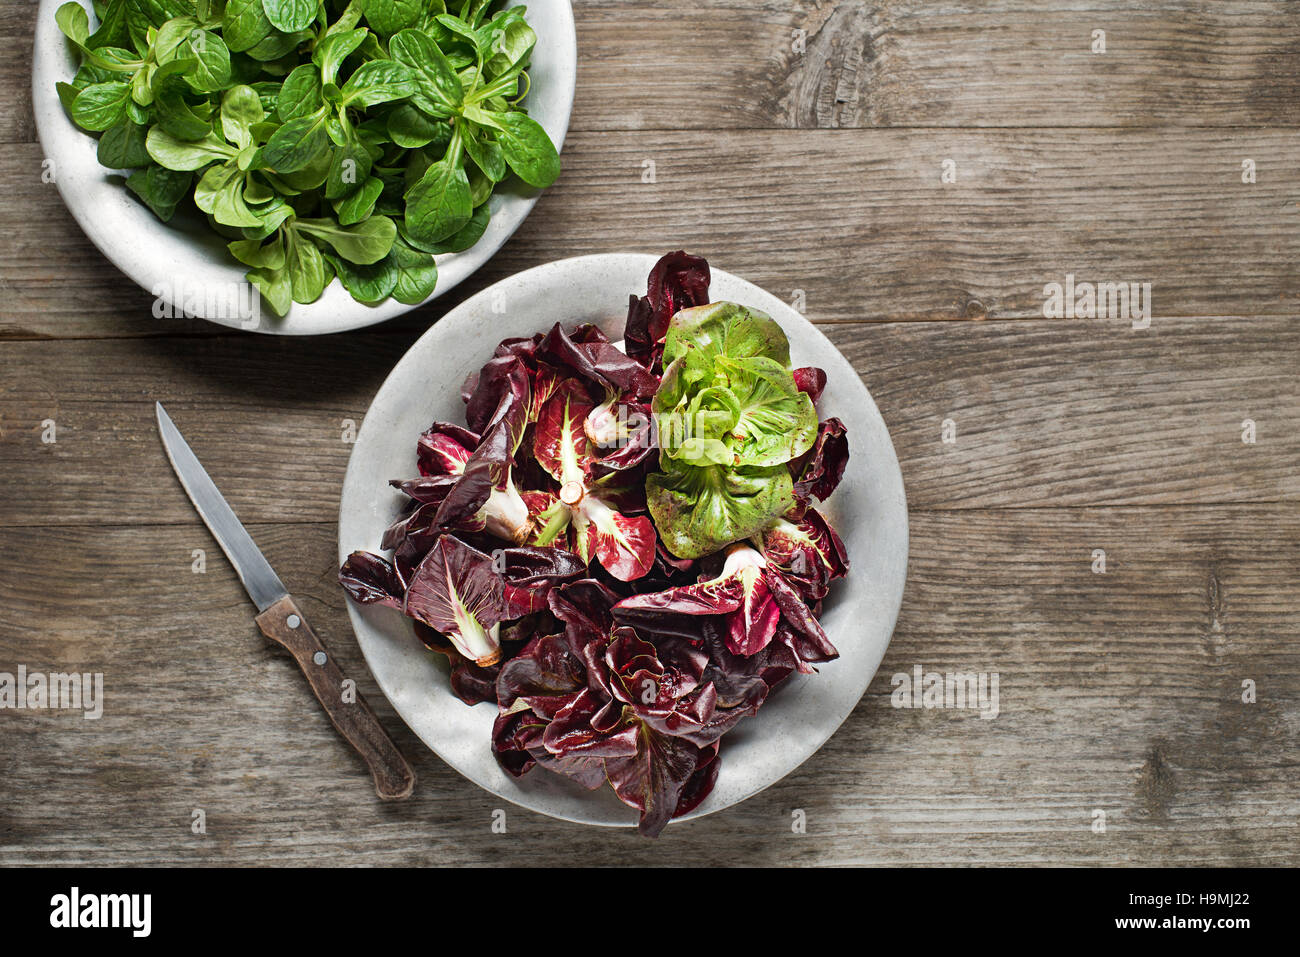 Valerianella lettuce and red radicchio in a plate close up Stock Photo